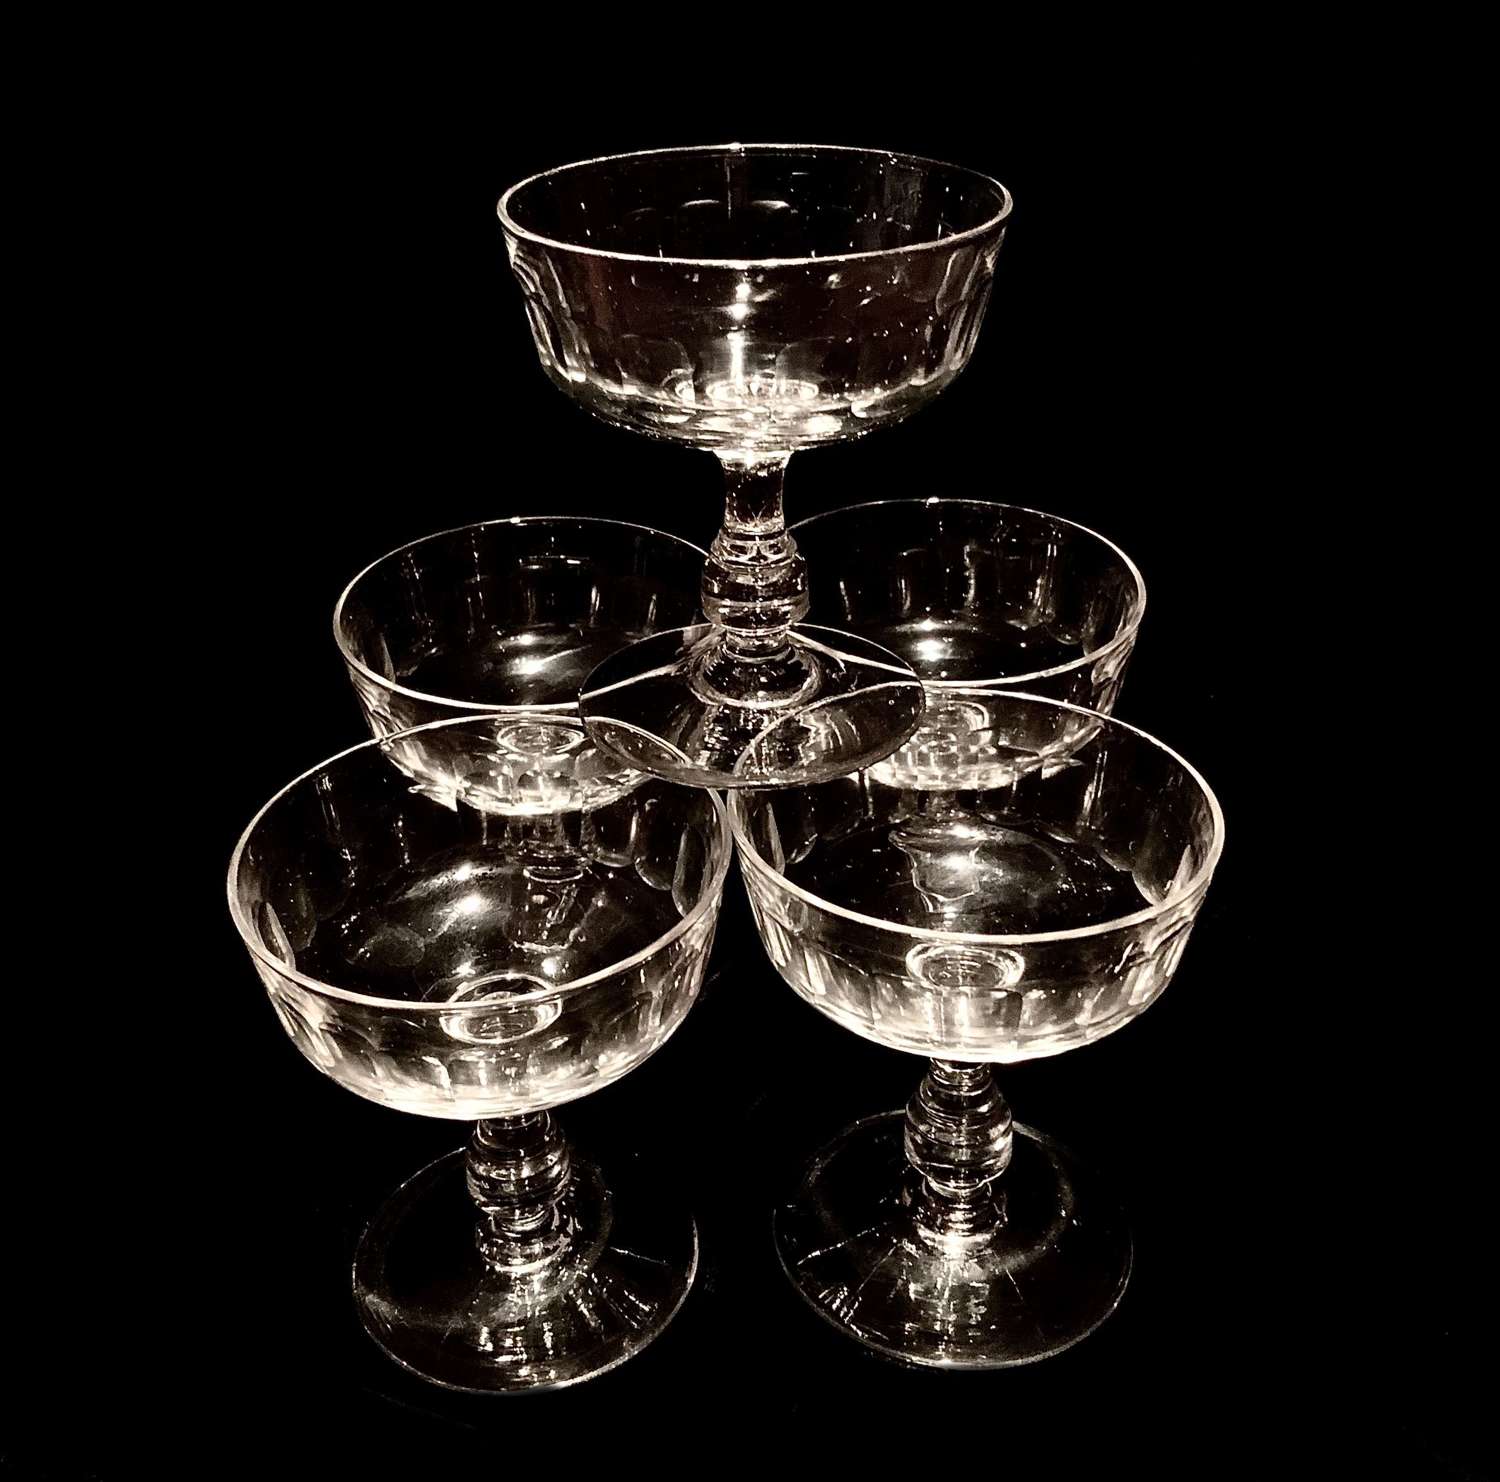 A set of five (5) matching champagne glasses, coupes or boats